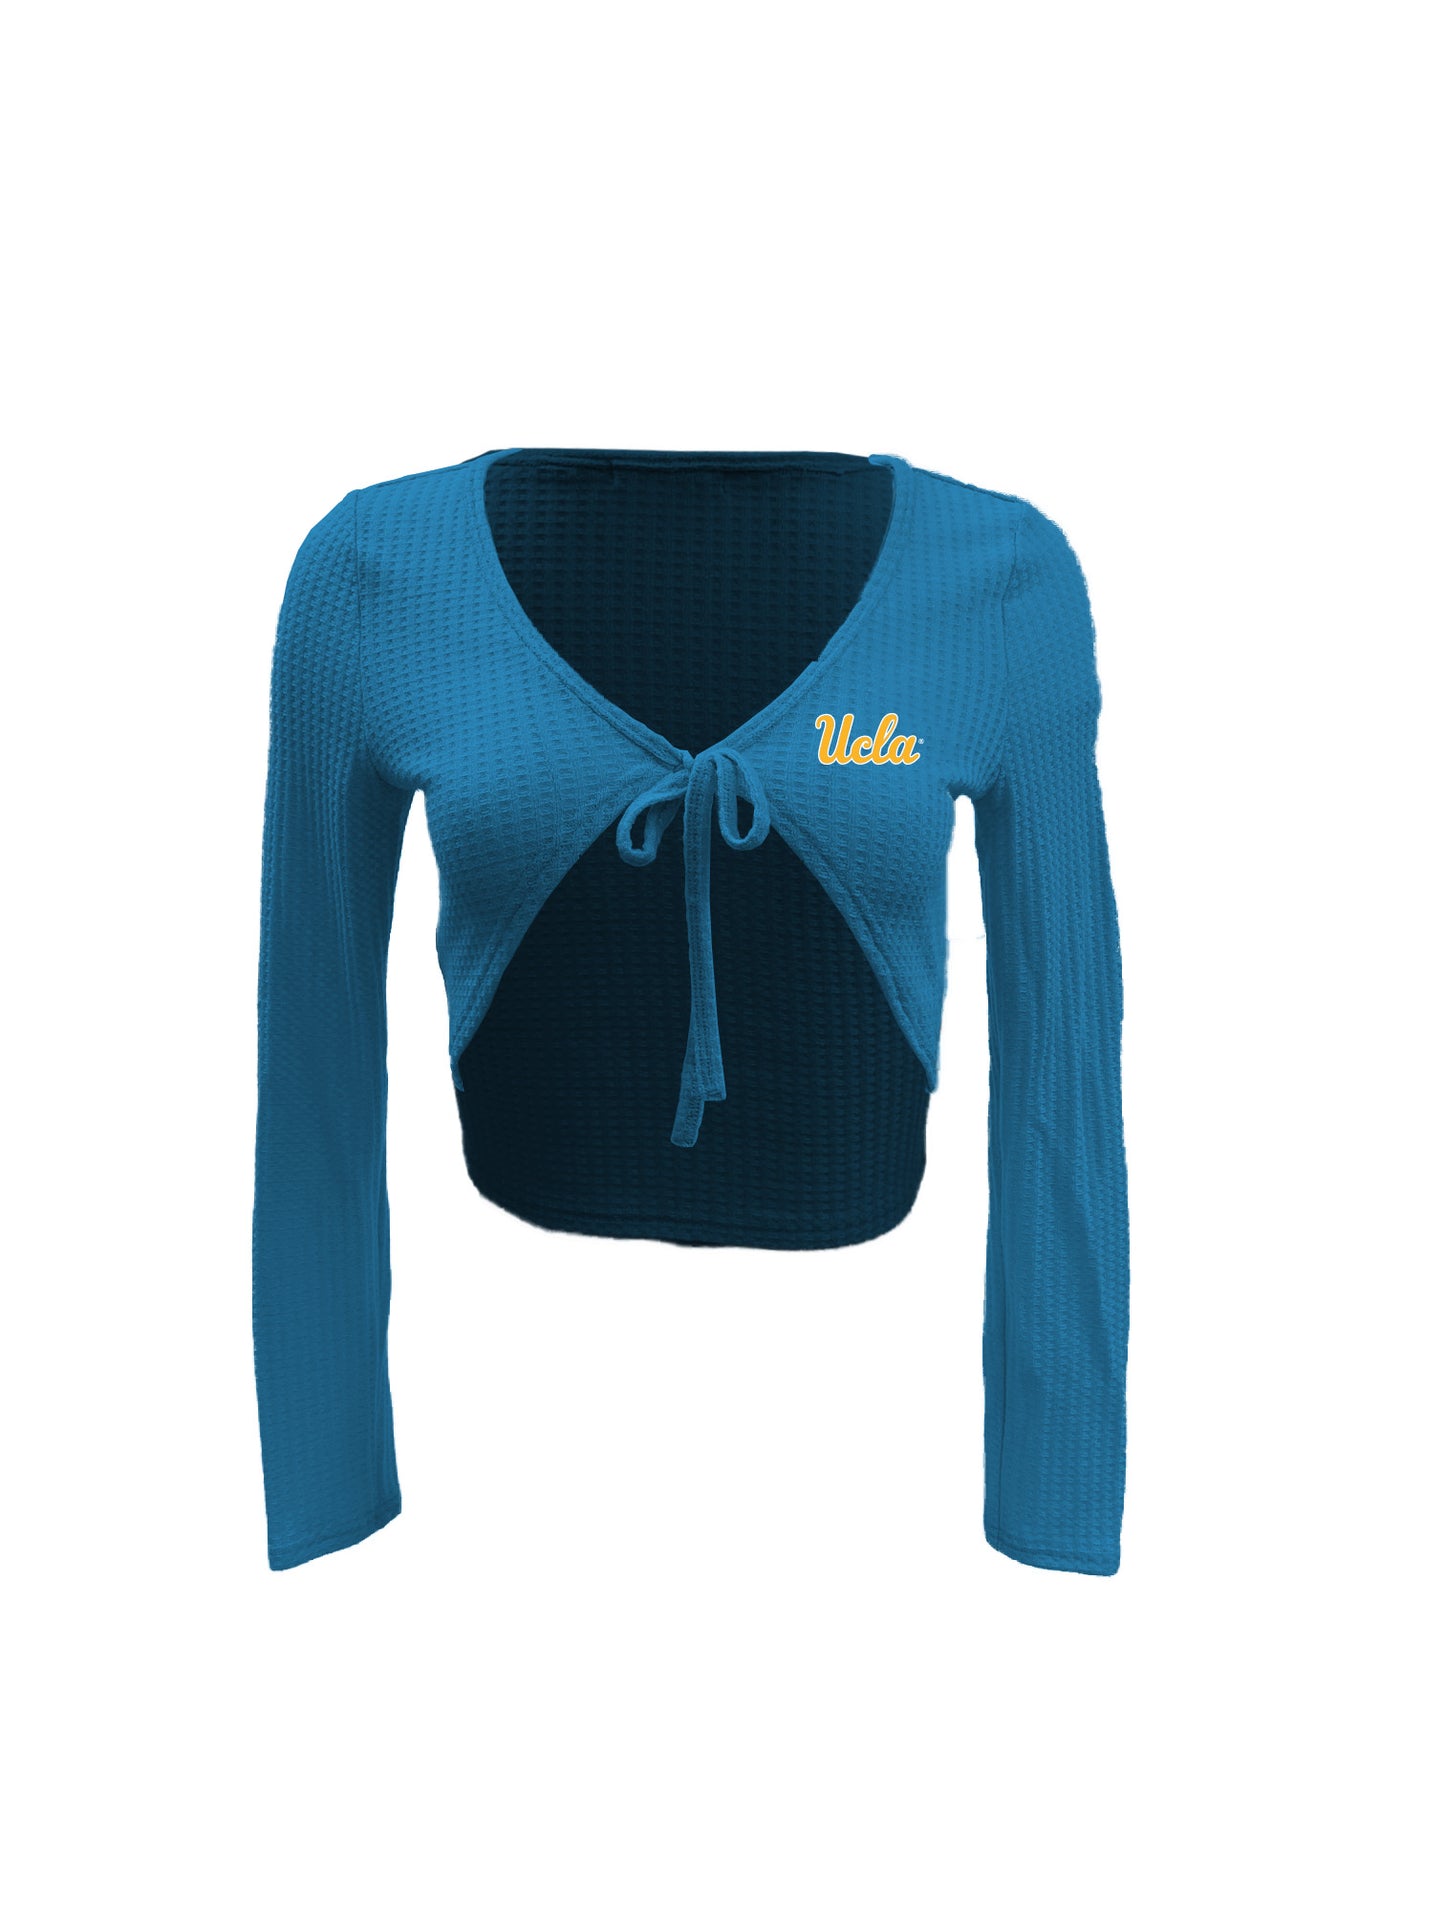 UCLA Bruins Women's Wes and Willy Long Sleeve Tie Front Crop Top